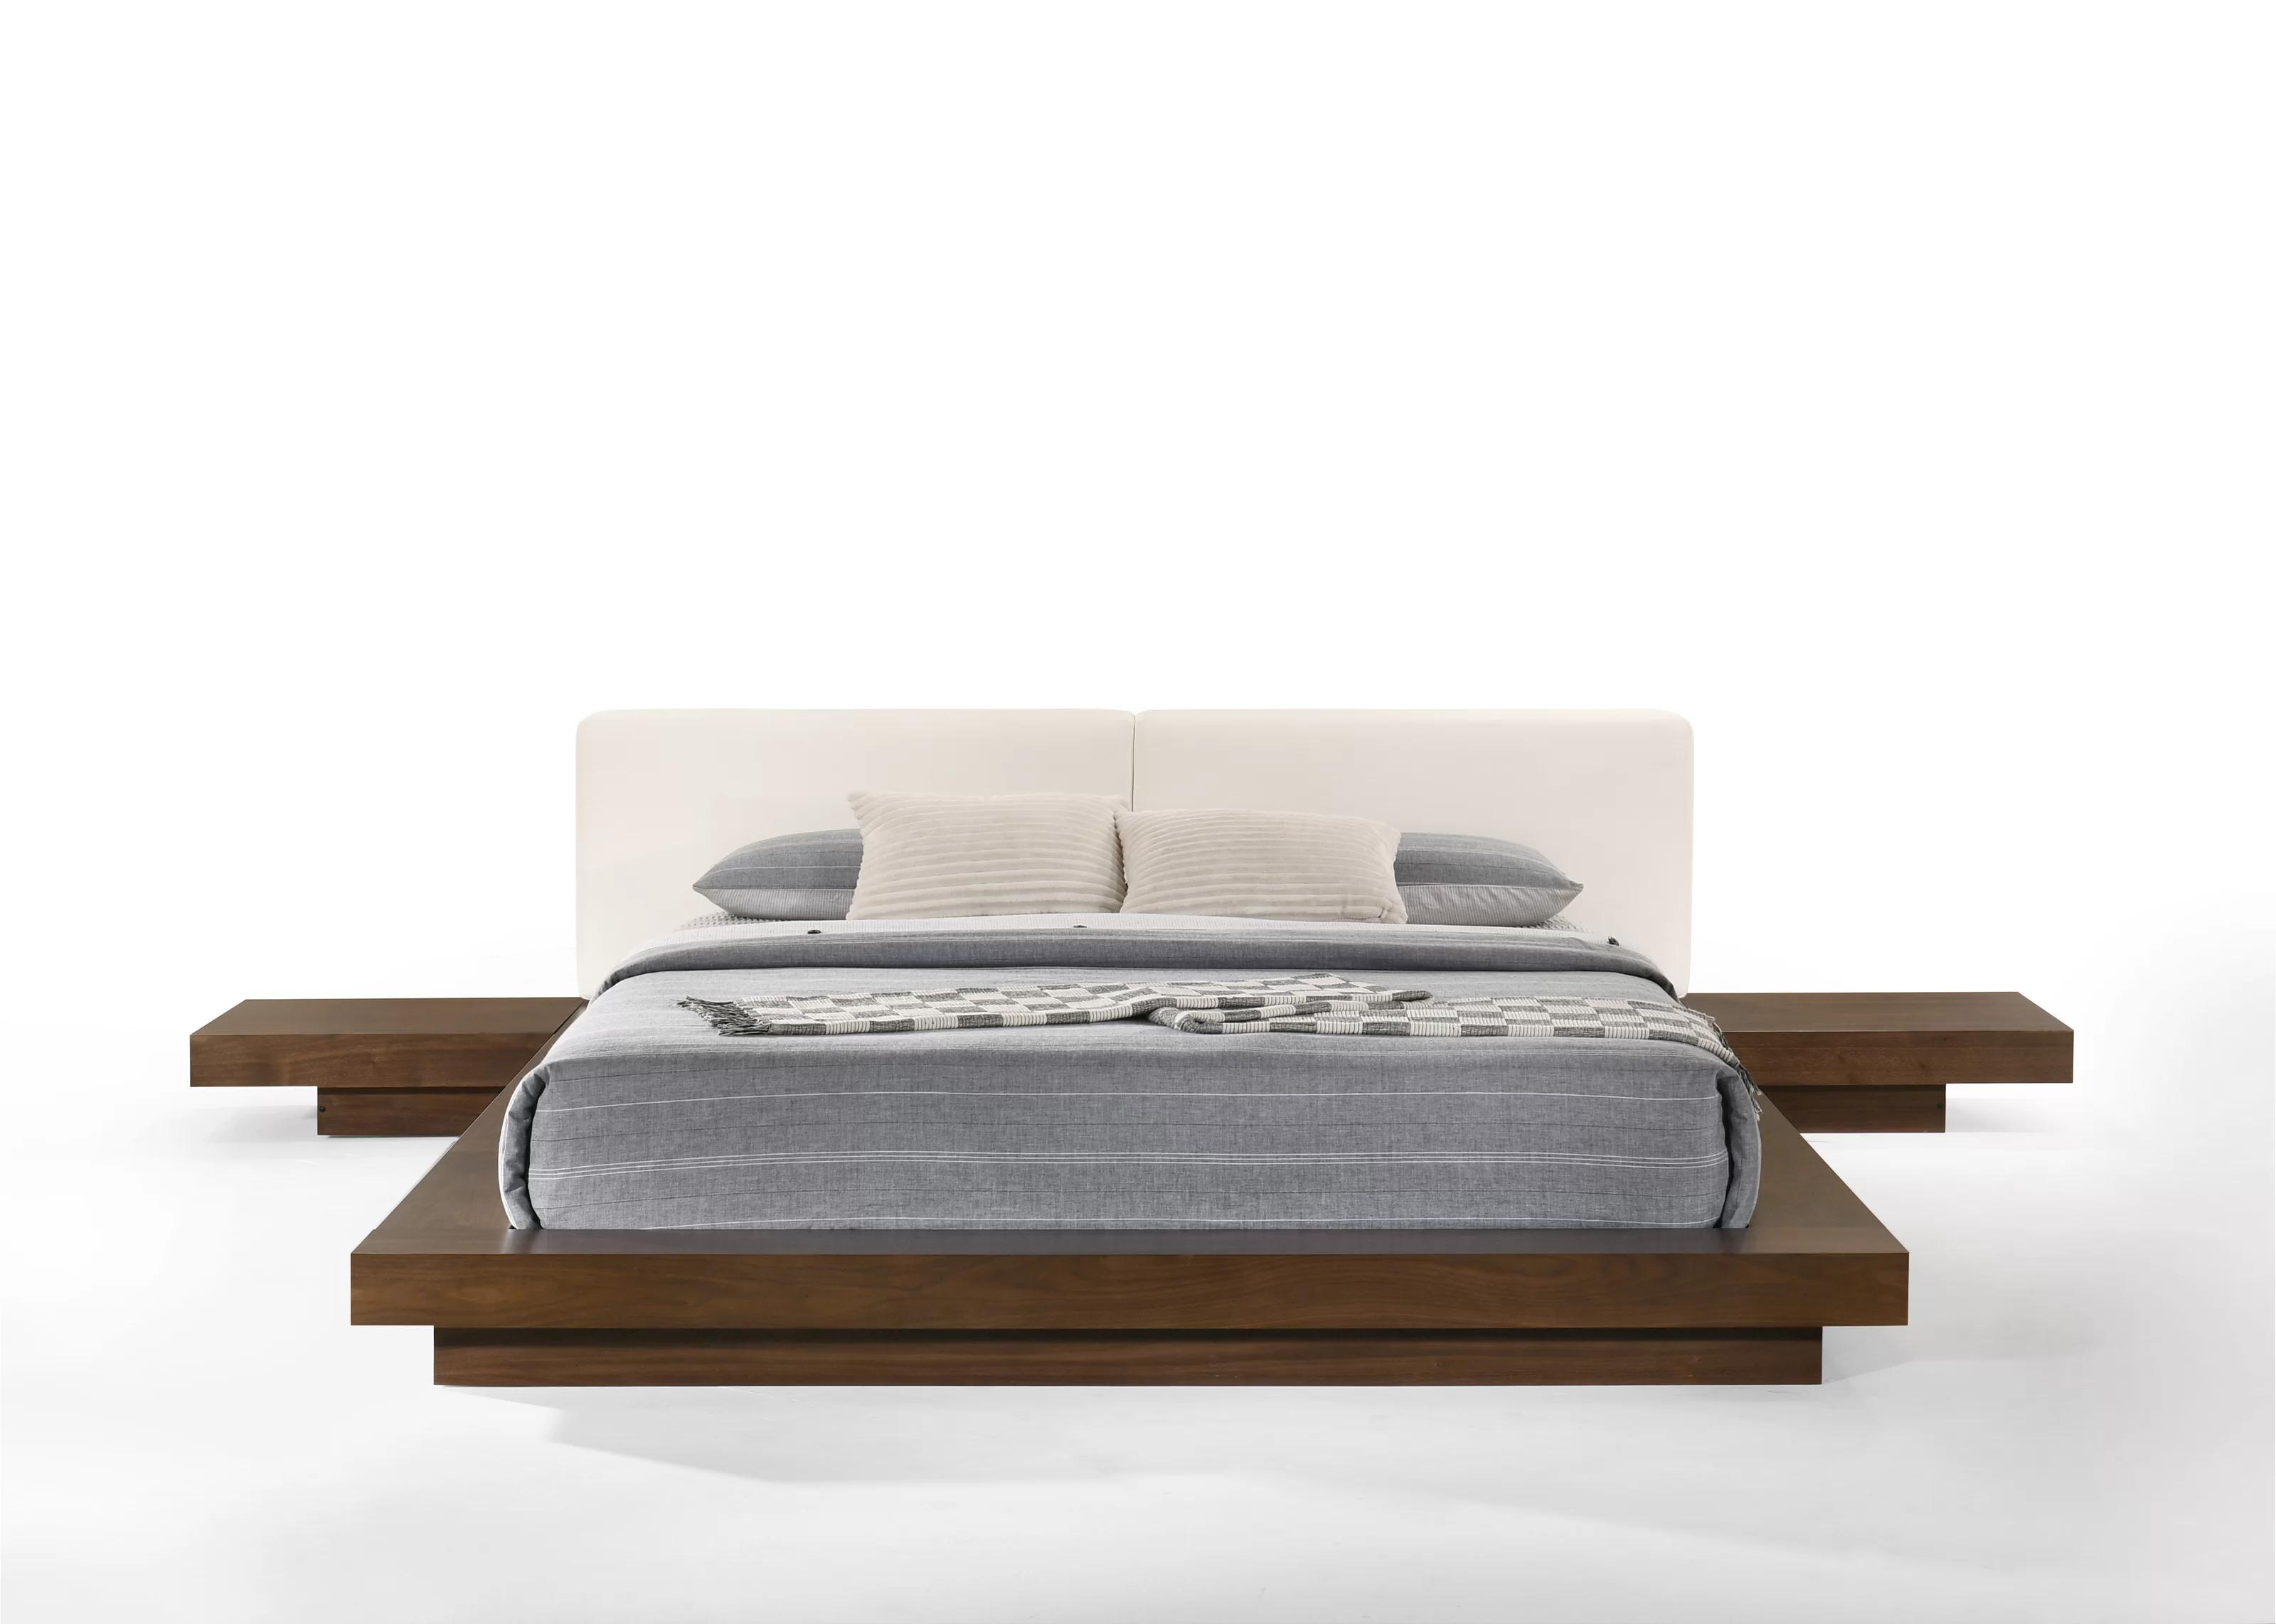 Contemporary, Modern Platform Bed Tokyo VGMABR-90-WAL-WHT in Walnut, White Leatherette